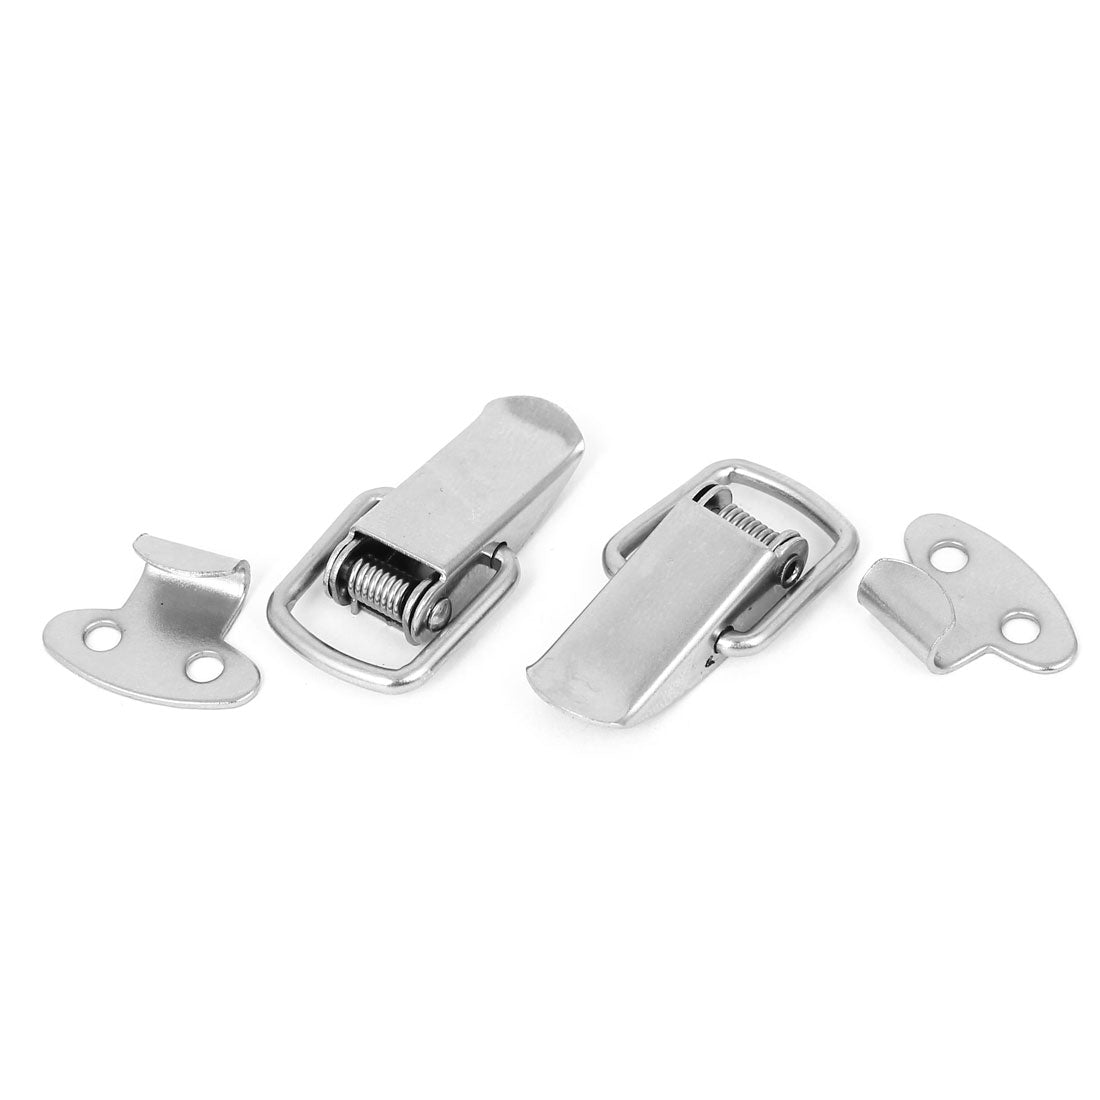 uxcell Uxcell Chests Drawer Toolbox Metal Toggle Latch Catch Hasp Silver Tone 12pcs